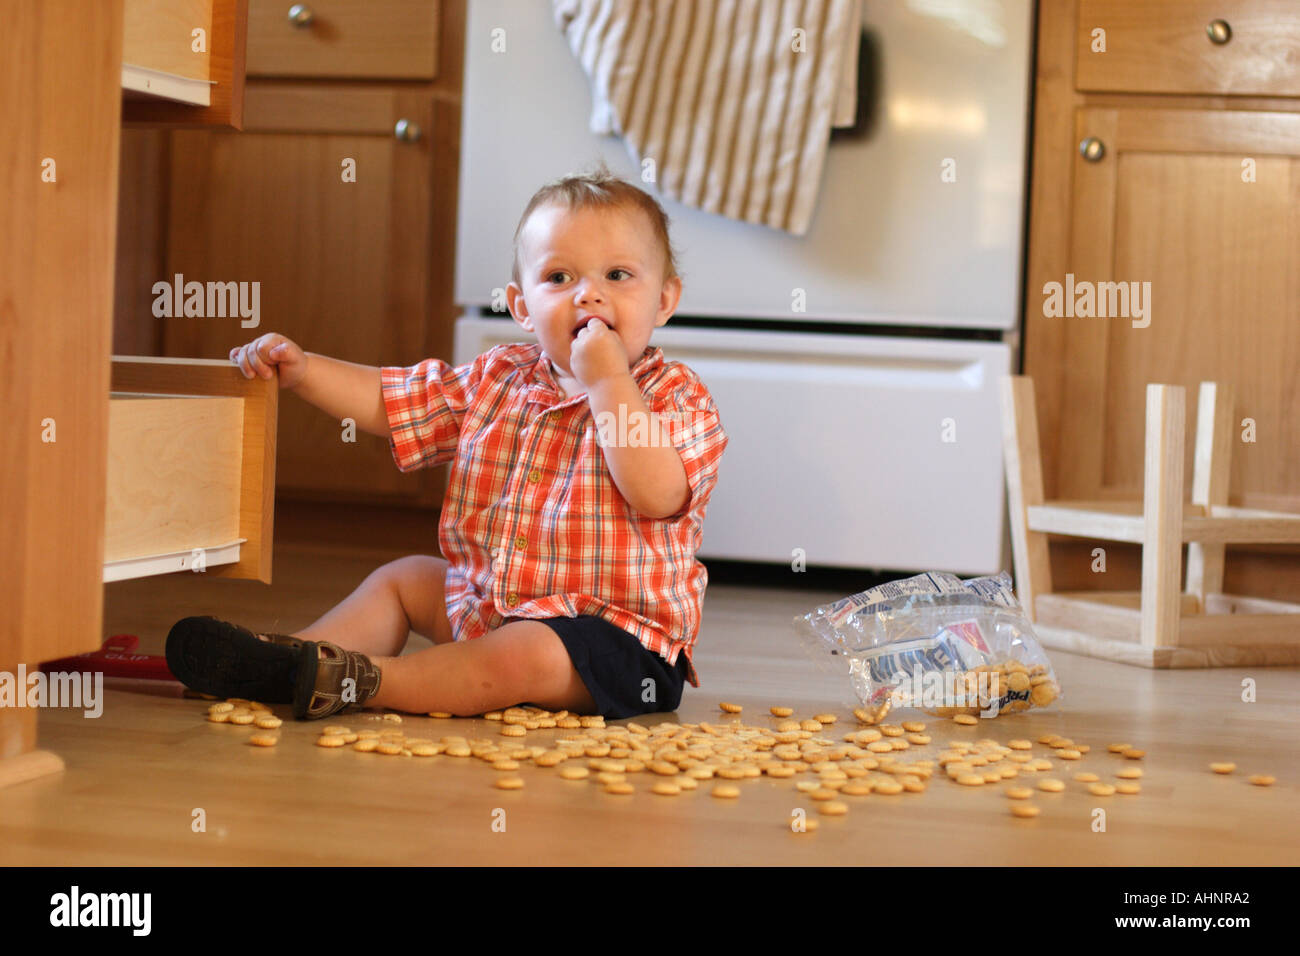 One year old boy making mess in kitchen Stock Photo